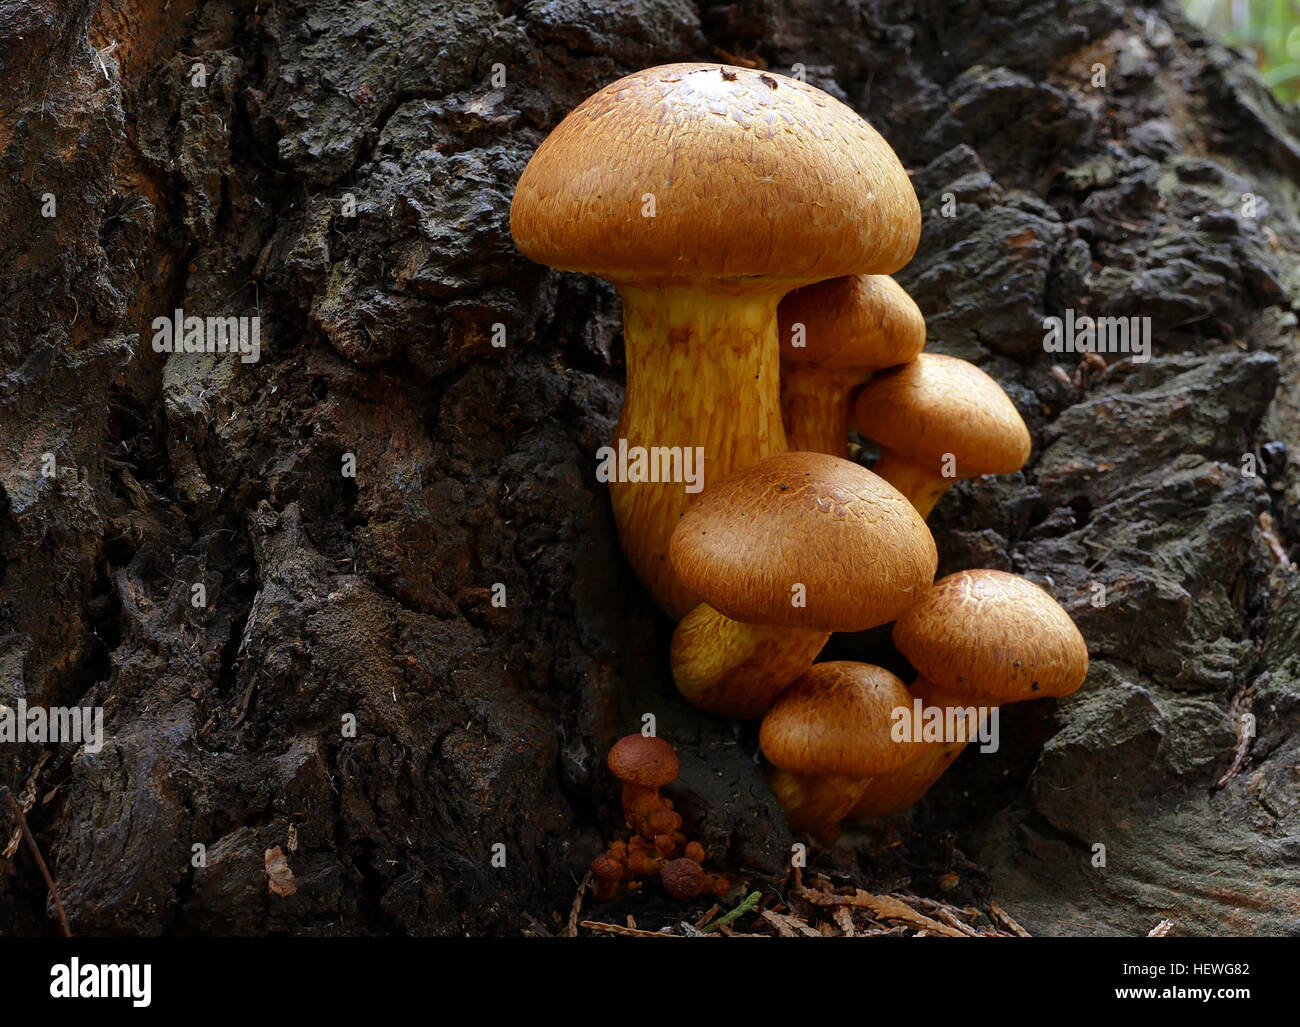 This impressive mushroom is found growing in dense clusters on stumps and logs of both hardwoods and conifers--and a number of associated species names are found growing in a dense cluster, as well. These species (if they are truly distinct), are all fairly large mushrooms that have orange to orangish brown spore prints, bitter taste, and stems that feature rings or ring zones. The central species name is Gymnopilus junonius, which is the correct name for &quot;Gymnopilus spectabilis,&quot; according to the most recent taxonomists. Stock Photo